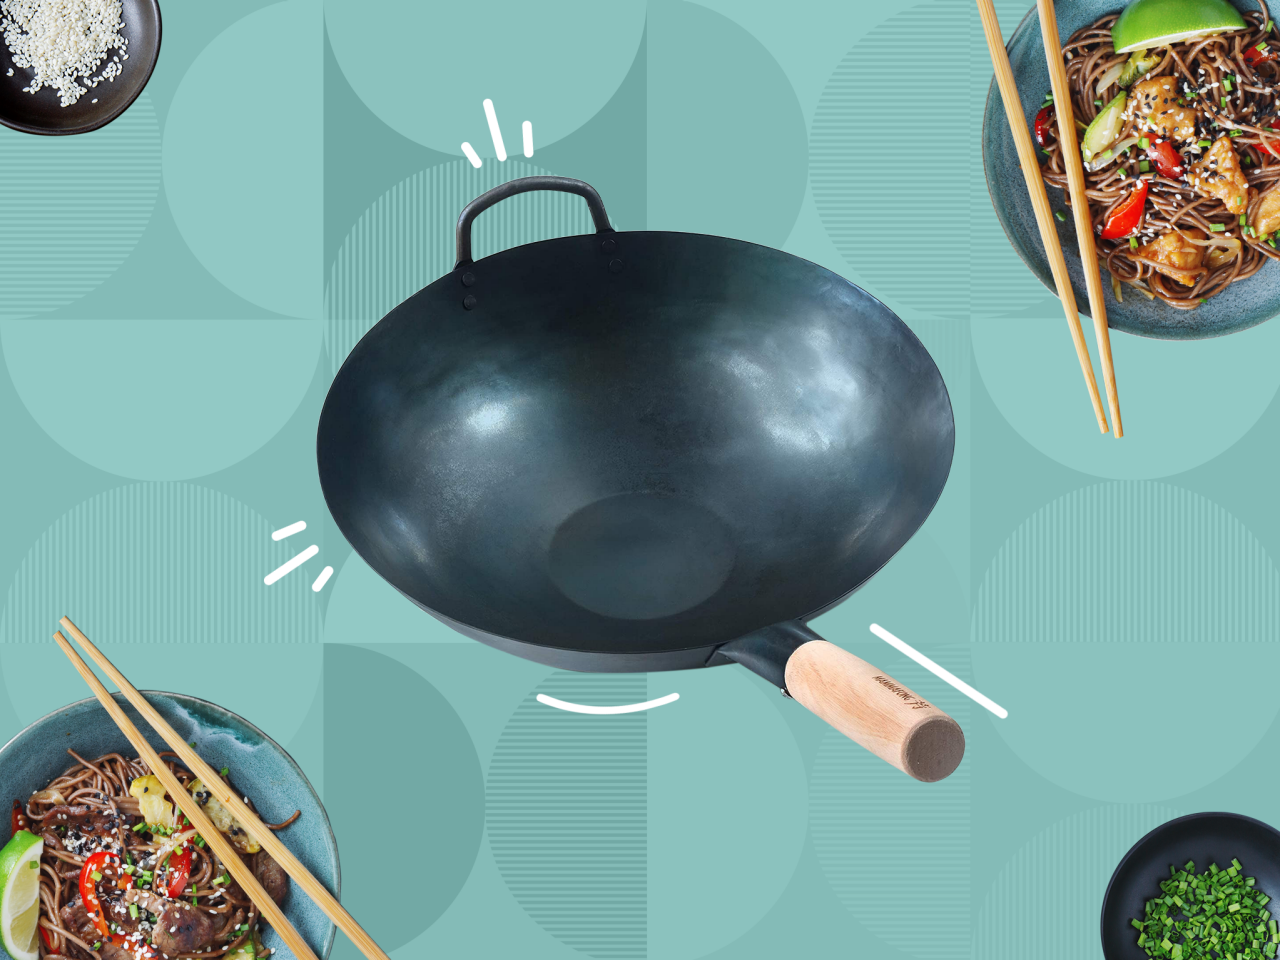 How to Use A Wok For Stir Frying & Steaming - Foodal